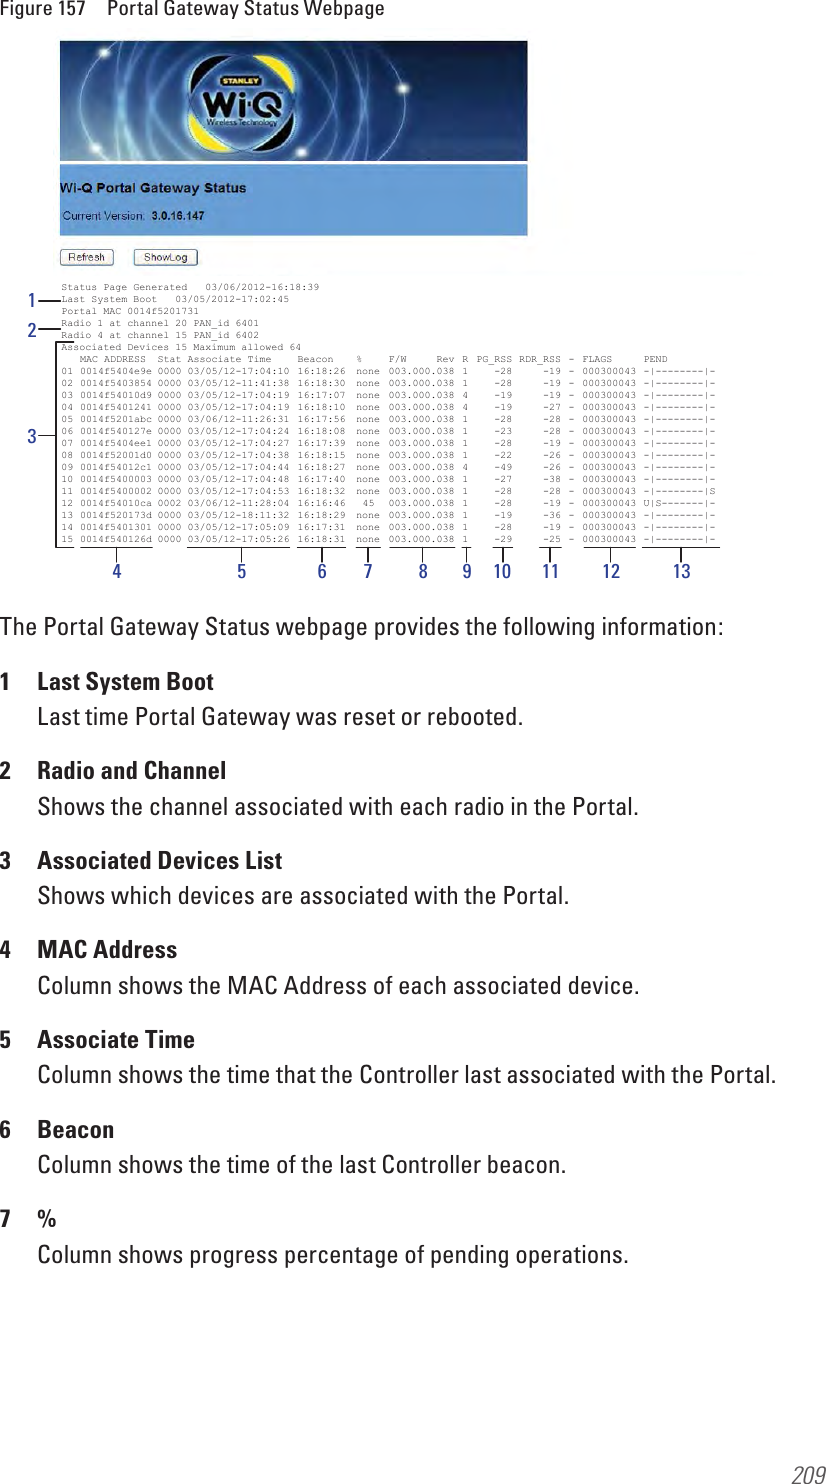 209Figure 157  Portal Gateway Status WebpageThe Portal Gateway Status webpage provides the following information:1  Last System Boot Last time Portal Gateway was reset or rebooted.2  Radio and Channel Shows the channel associated with each radio in the Portal.3  Associated Devices List Shows which devices are associated with the Portal.4  MAC Address Column shows the MAC Address of each associated device.5  Associate Time Column shows the time that the Controller last associated with the Portal.6  Beacon Column shows the time of the last Controller beacon.7  % Column shows progress percentage of pending operations.12345 6 7 8 9 10 11 12 13Status Page Generated   03/06/2012-16:18:39Last System Boot   03/05/2012-17:02:45Portal MAC 0014f5201731Radio 1 at channel 20 PAN_id 6401Radio 4 at channel 15 PAN_id 6402Associated Devices 15 Maximum allowed 64  MAC ADDRESS  Stat Associate Time  Beacon  %  F/W     Rev  R  PG_RSS RDR_RSS  -  FLAGS  PEND01 0014f5404e9e 0000 03/05/12-17:04:10  16:18:26  none  003.000.038  1  -28  -19 -  000300043  -|--------|-02 0014f5403854 0000 03/05/12-11:41:38  16:18:30  none  003.000.038  1  -28  -19 -  000300043  -|--------|-03 0014f54010d9 0000 03/05/12-17:04:19  16:17:07  none  003.000.038  4  -19  -19 -  000300043  -|--------|-04 0014f5401241 0000 03/05/12-17:04:19  16:18:10  none  003.000.038  4  -19  -27 -  000300043  -|--------|-05 0014f5201abc 0000 03/06/12-11:26:31  16:17:56  none  003.000.038  1  -28  -28 -  000300043  -|--------|-06 0014f540127e 0000 03/05/12-17:04:24  16:18:08  none  003.000.038  1  -23  -28 -  000300043  -|--------|-07 0014f5404ee1 0000 03/05/12-17:04:27  16:17:39  none  003.000.038  1  -28  -19 -  000300043  -|--------|-08 0014f52001d0 0000 03/05/12-17:04:38  16:18:15  none  003.000.038  1  -22  -26 -  000300043  -|--------|-09 0014f54012c1 0000 03/05/12-17:04:44  16:18:27  none  003.000.038  4  -49  -26 -  000300043  -|--------|-10 0014f5400003 0000 03/05/12-17:04:48  16:17:40  none  003.000.038  1  -27  -38 -  000300043  -|--------|-11 0014f5400002 0000 03/05/12-17:04:53  16:18:32  none  003.000.038  1  -28  -28 -  000300043  -|--------|S12 0014f54010ca 0002 03/06/12-11:28:04  16:16:46  45  003.000.038  1  -28  -19  -  000300043  U|S-------|-13 0014f520173d 0000 03/05/12-18:11:32  16:18:29  none  003.000.038  1  -19  -36 -  000300043  -|--------|-14 0014f5401301 0000 03/05/12-17:05:09  16:17:31  none  003.000.038  1  -28  -19 -  000300043  -|--------|-15 0014f540126d 0000 03/05/12-17:05:26  16:18:31  none  003.000.038  1  -29  -25 -  000300043  -|--------|-